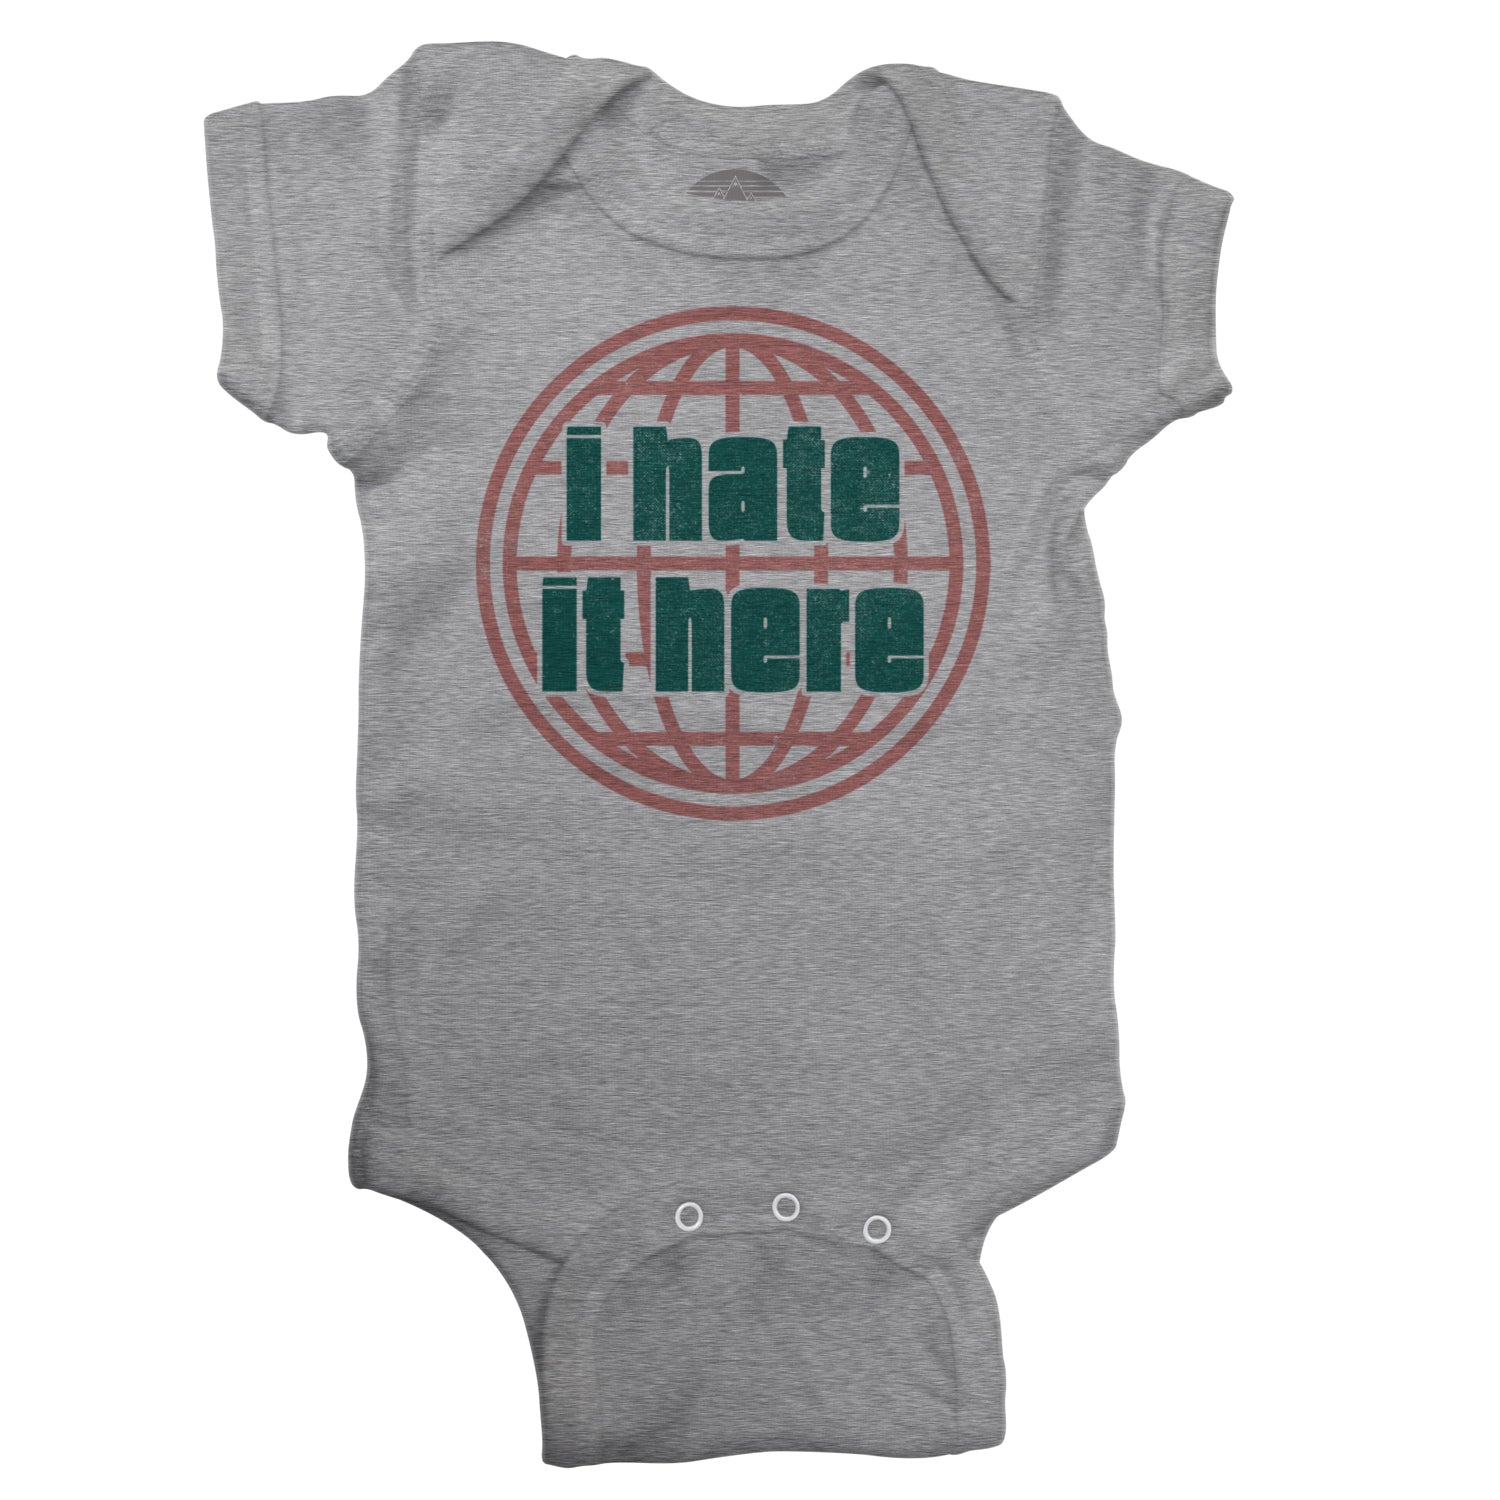 I Hate It Here Infant Bodysuit - Unisex Fit